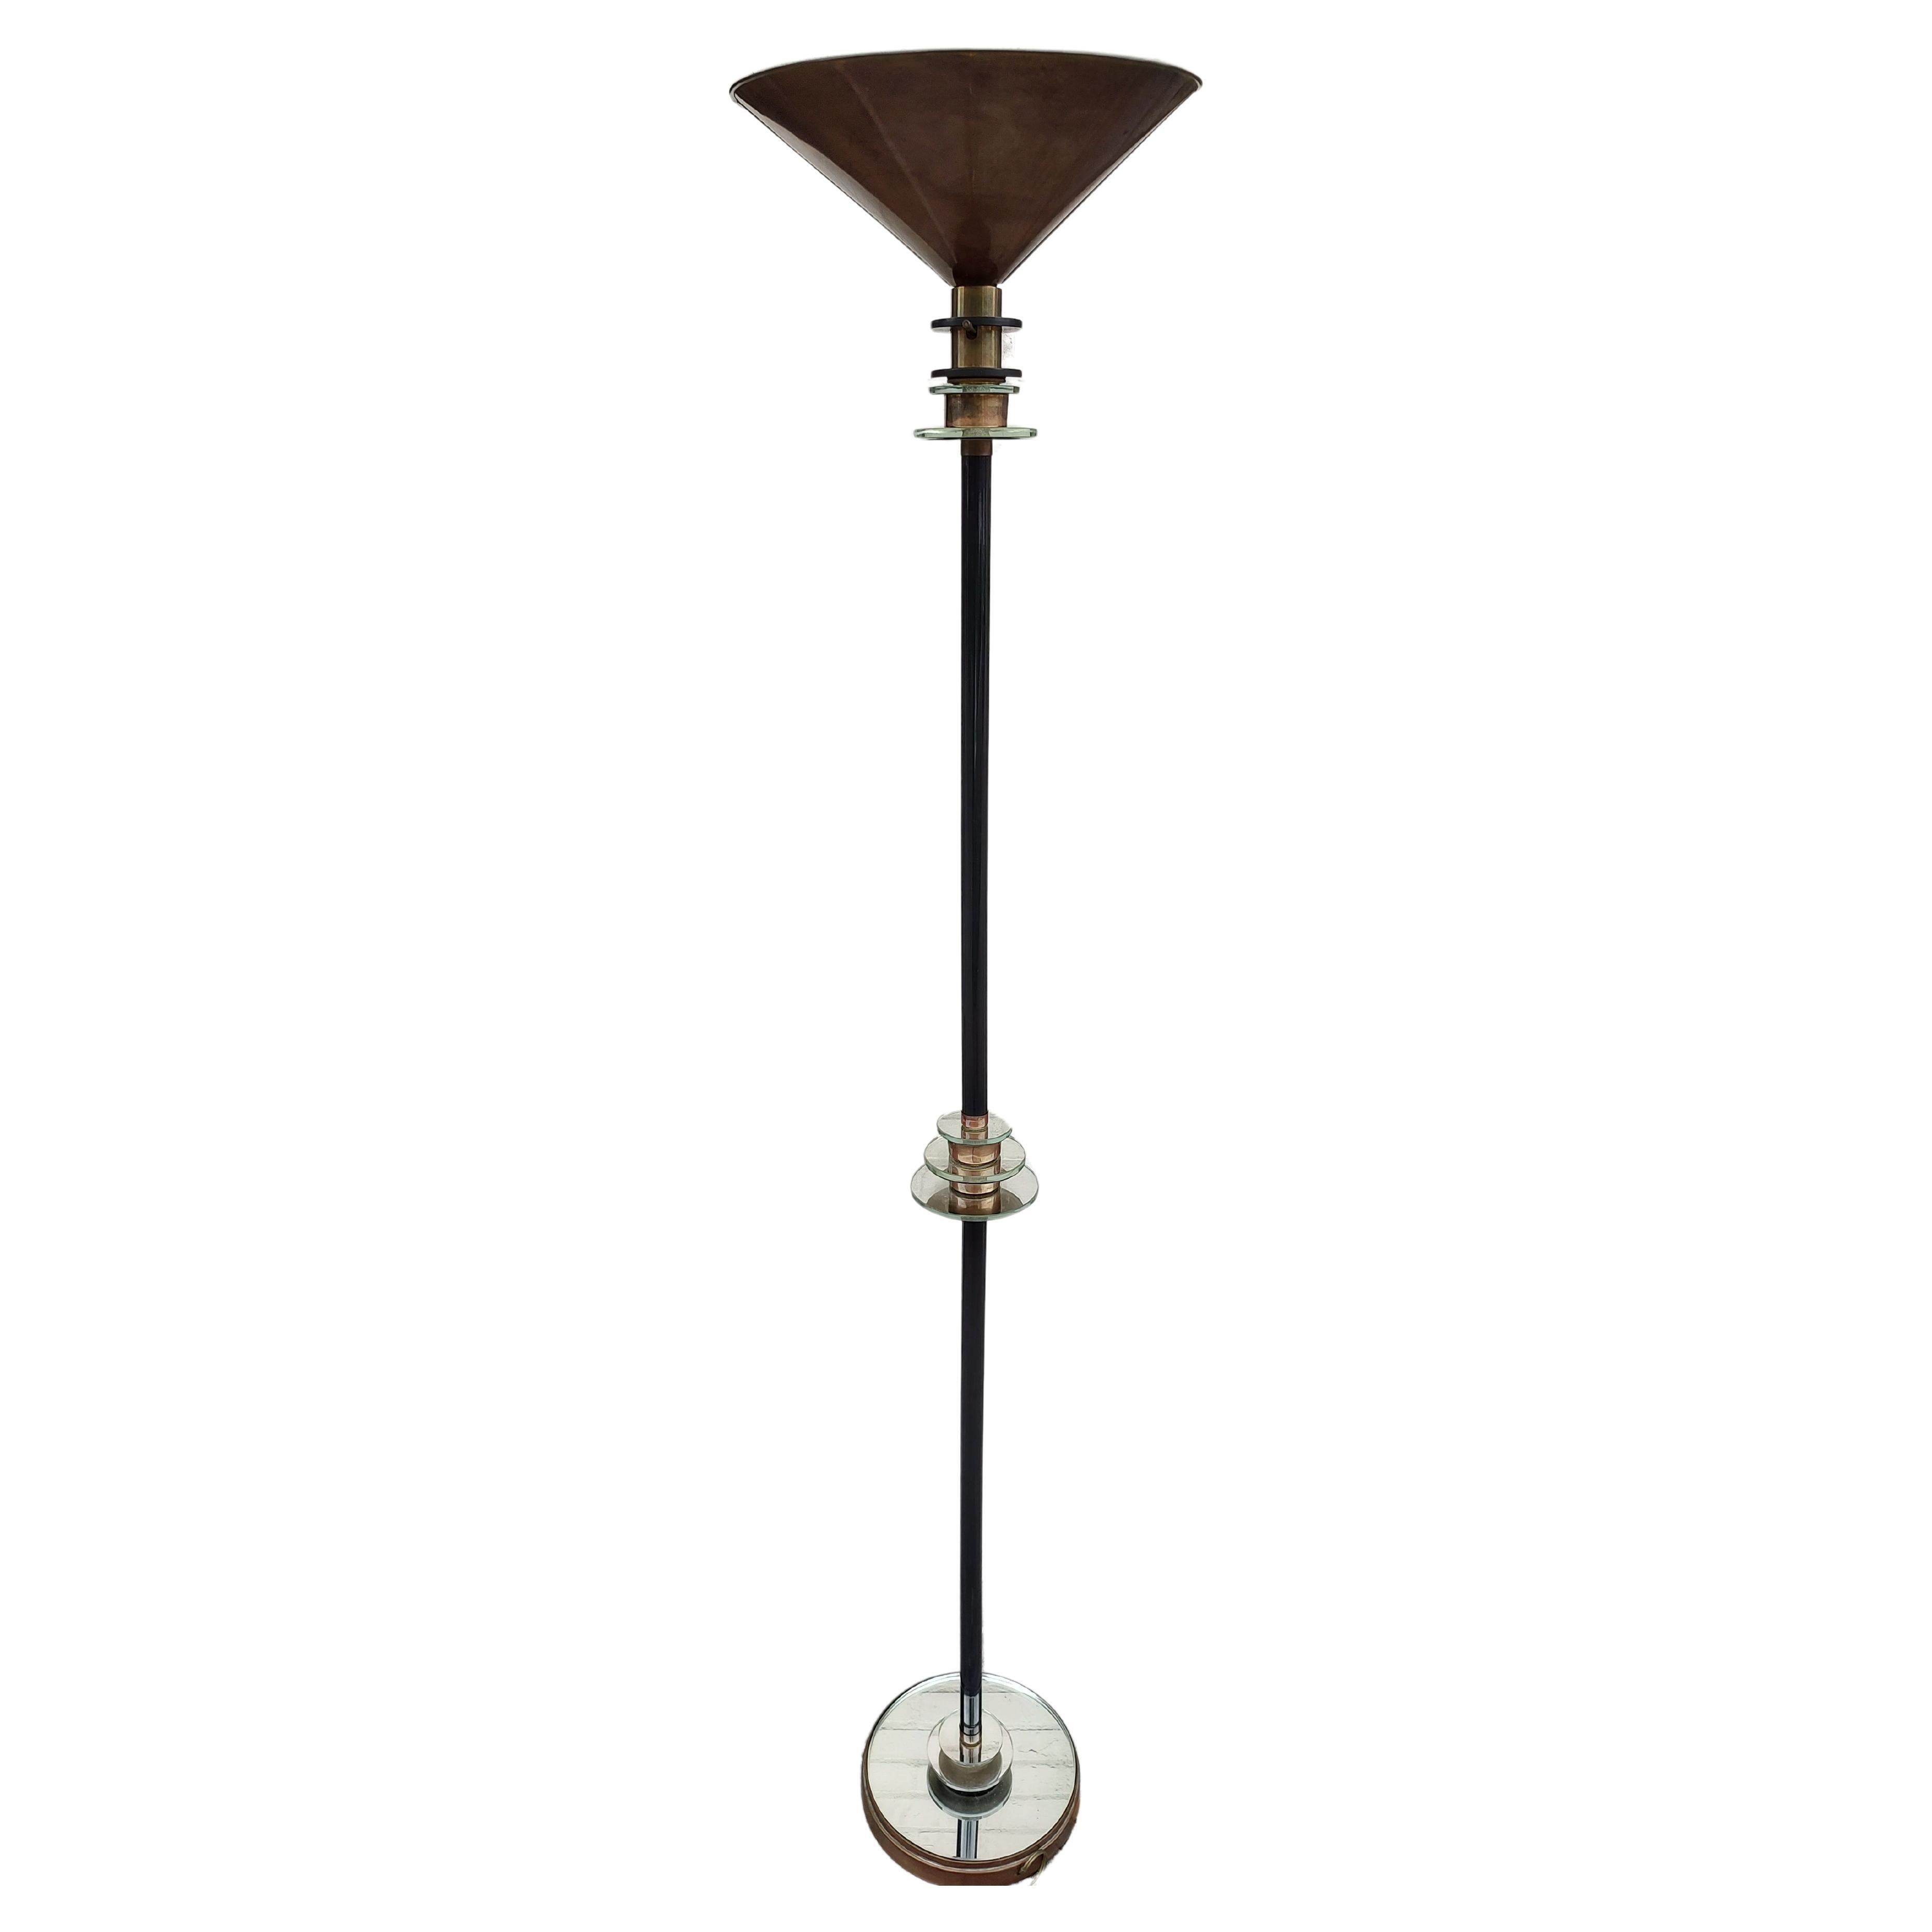 Art Deco Torchiere Floor Lamp with Stepped Mirror Design For Sale